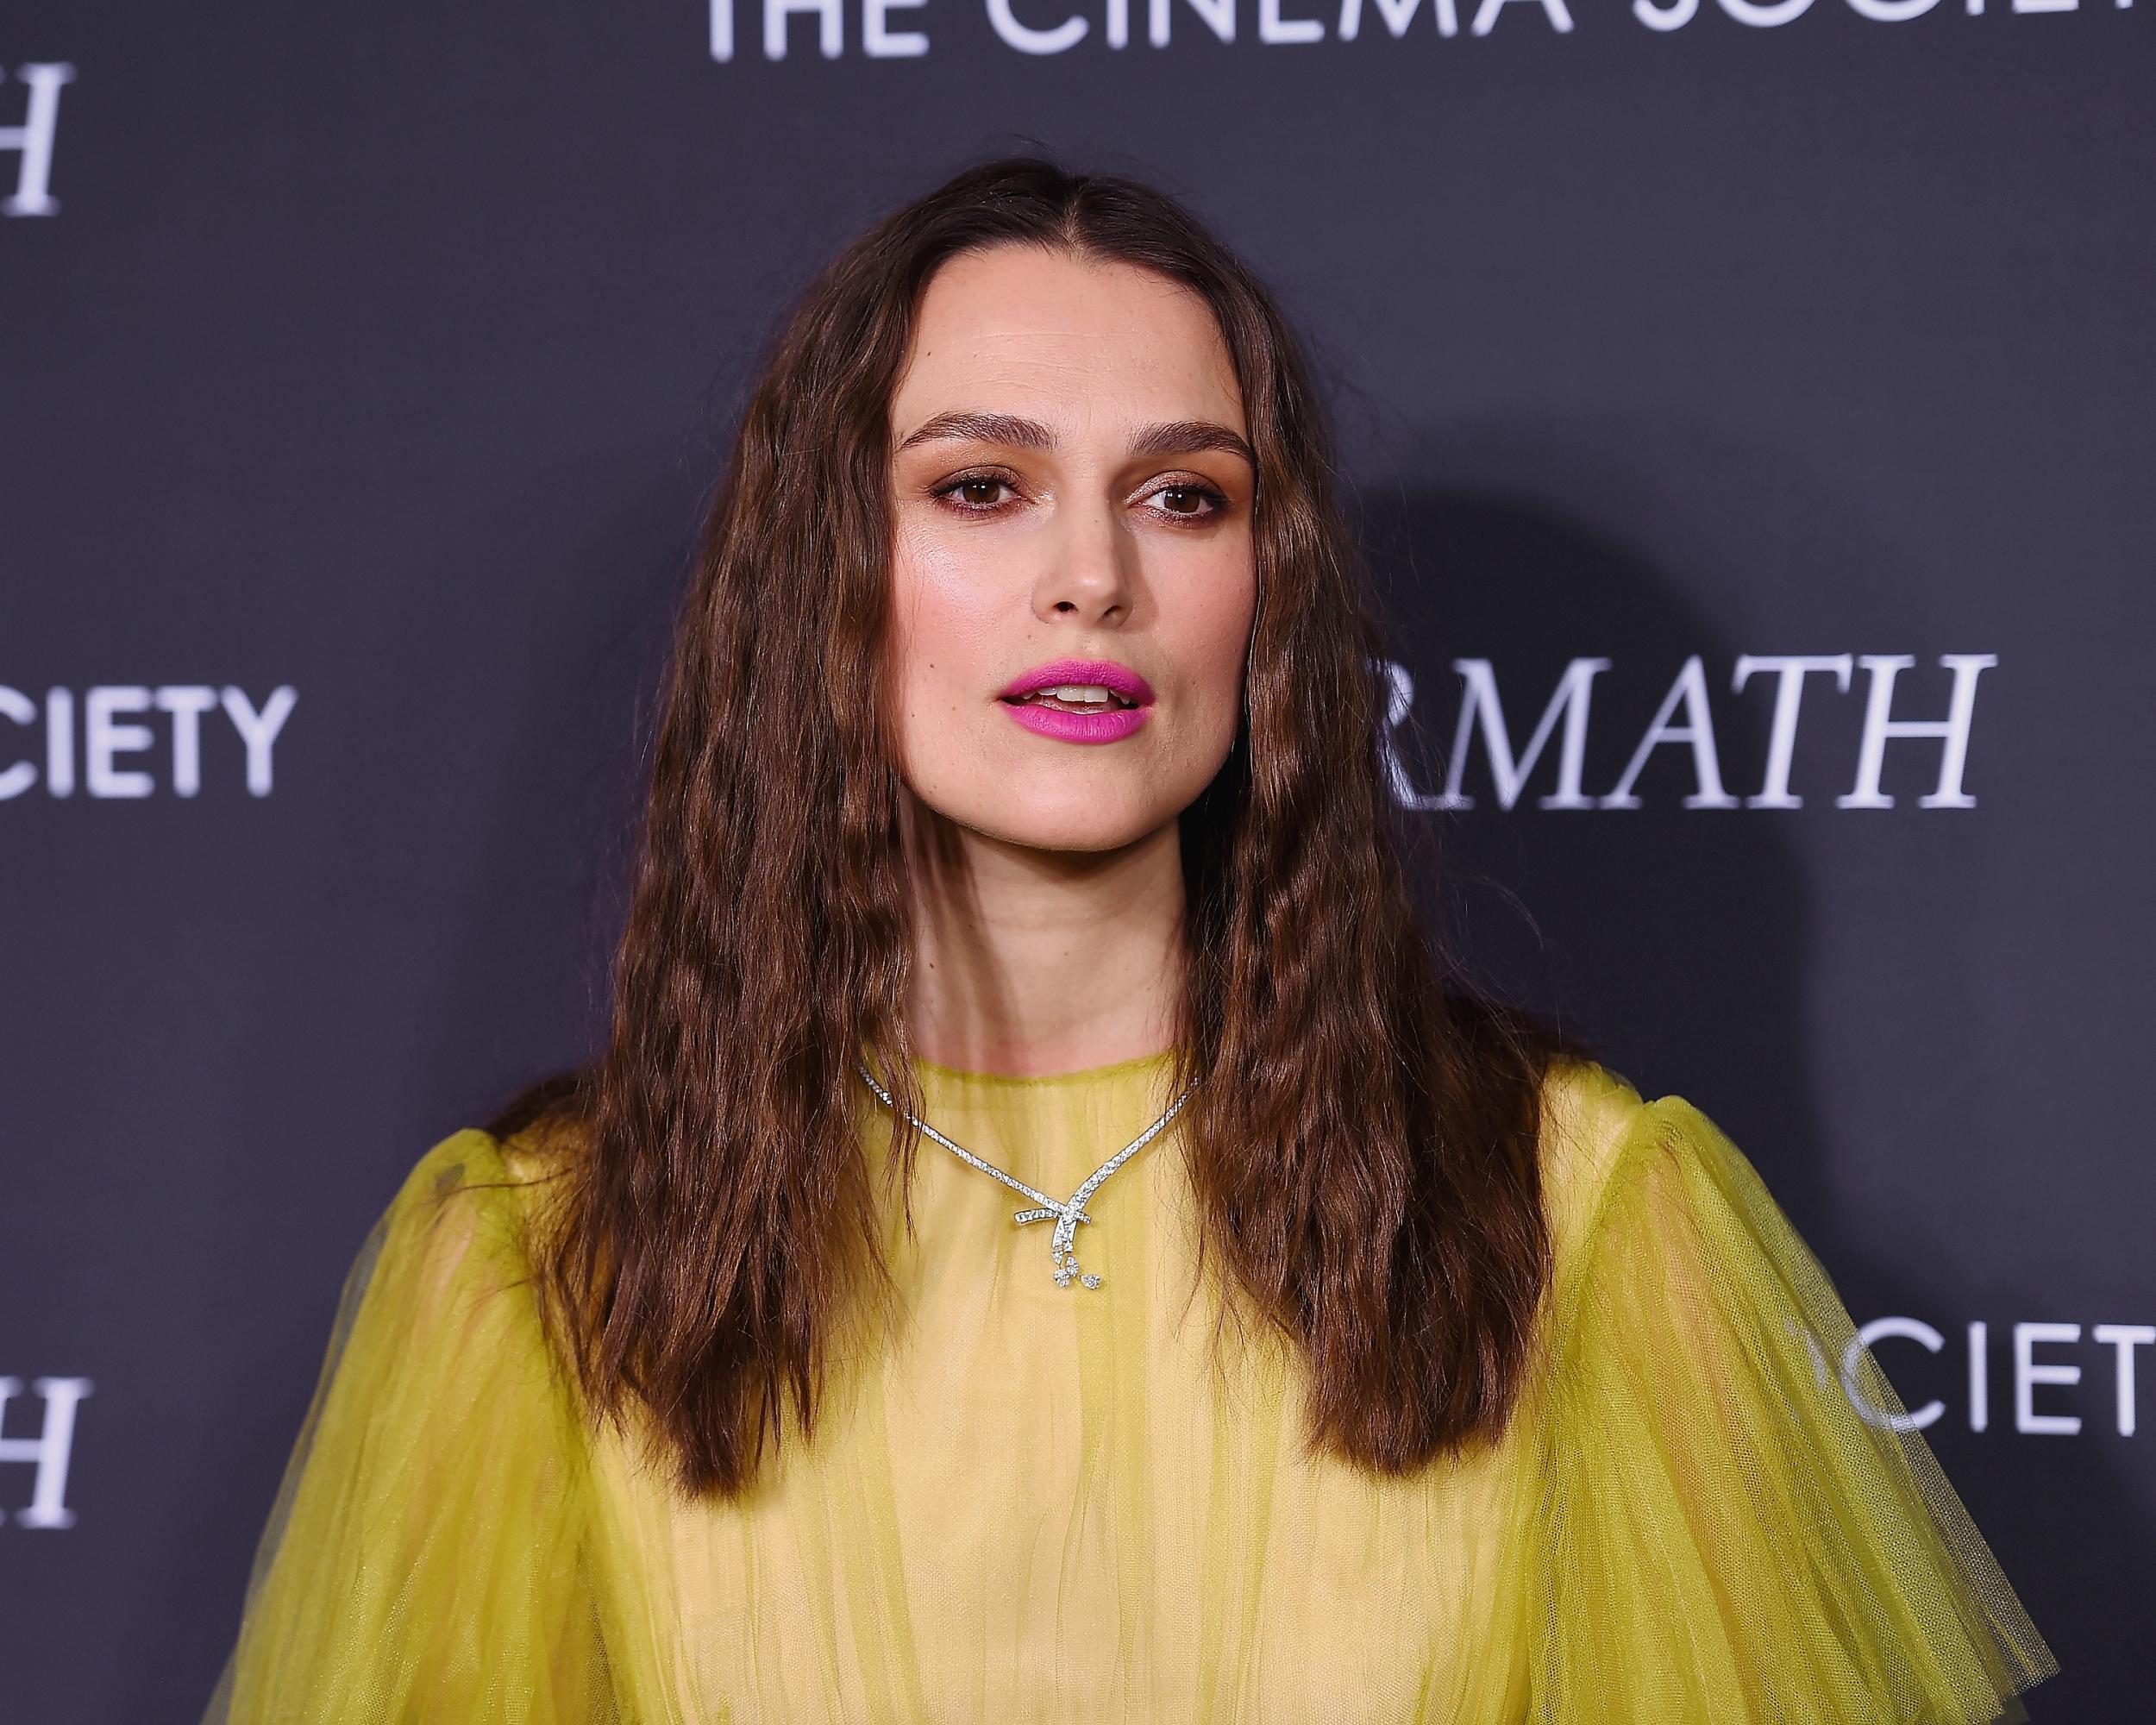 Keira Knightley says she won't do nude scenes in case they are uploaded to porn websites